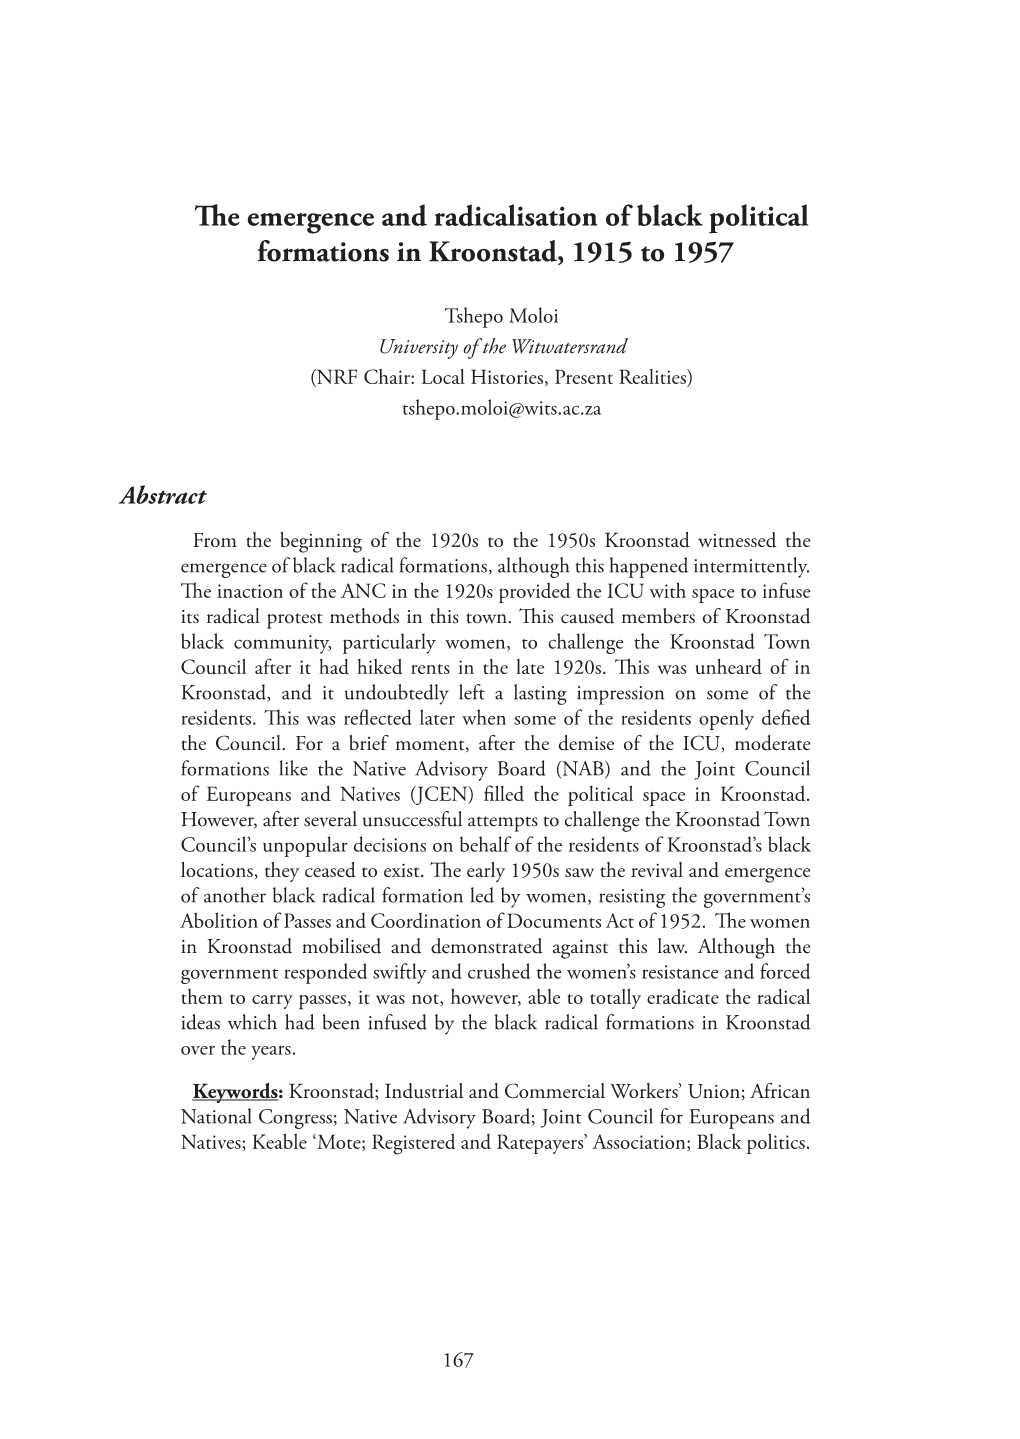 The Emergence and Radicalisation of Black Political Formations in Kroonstad, 1915 to 1957